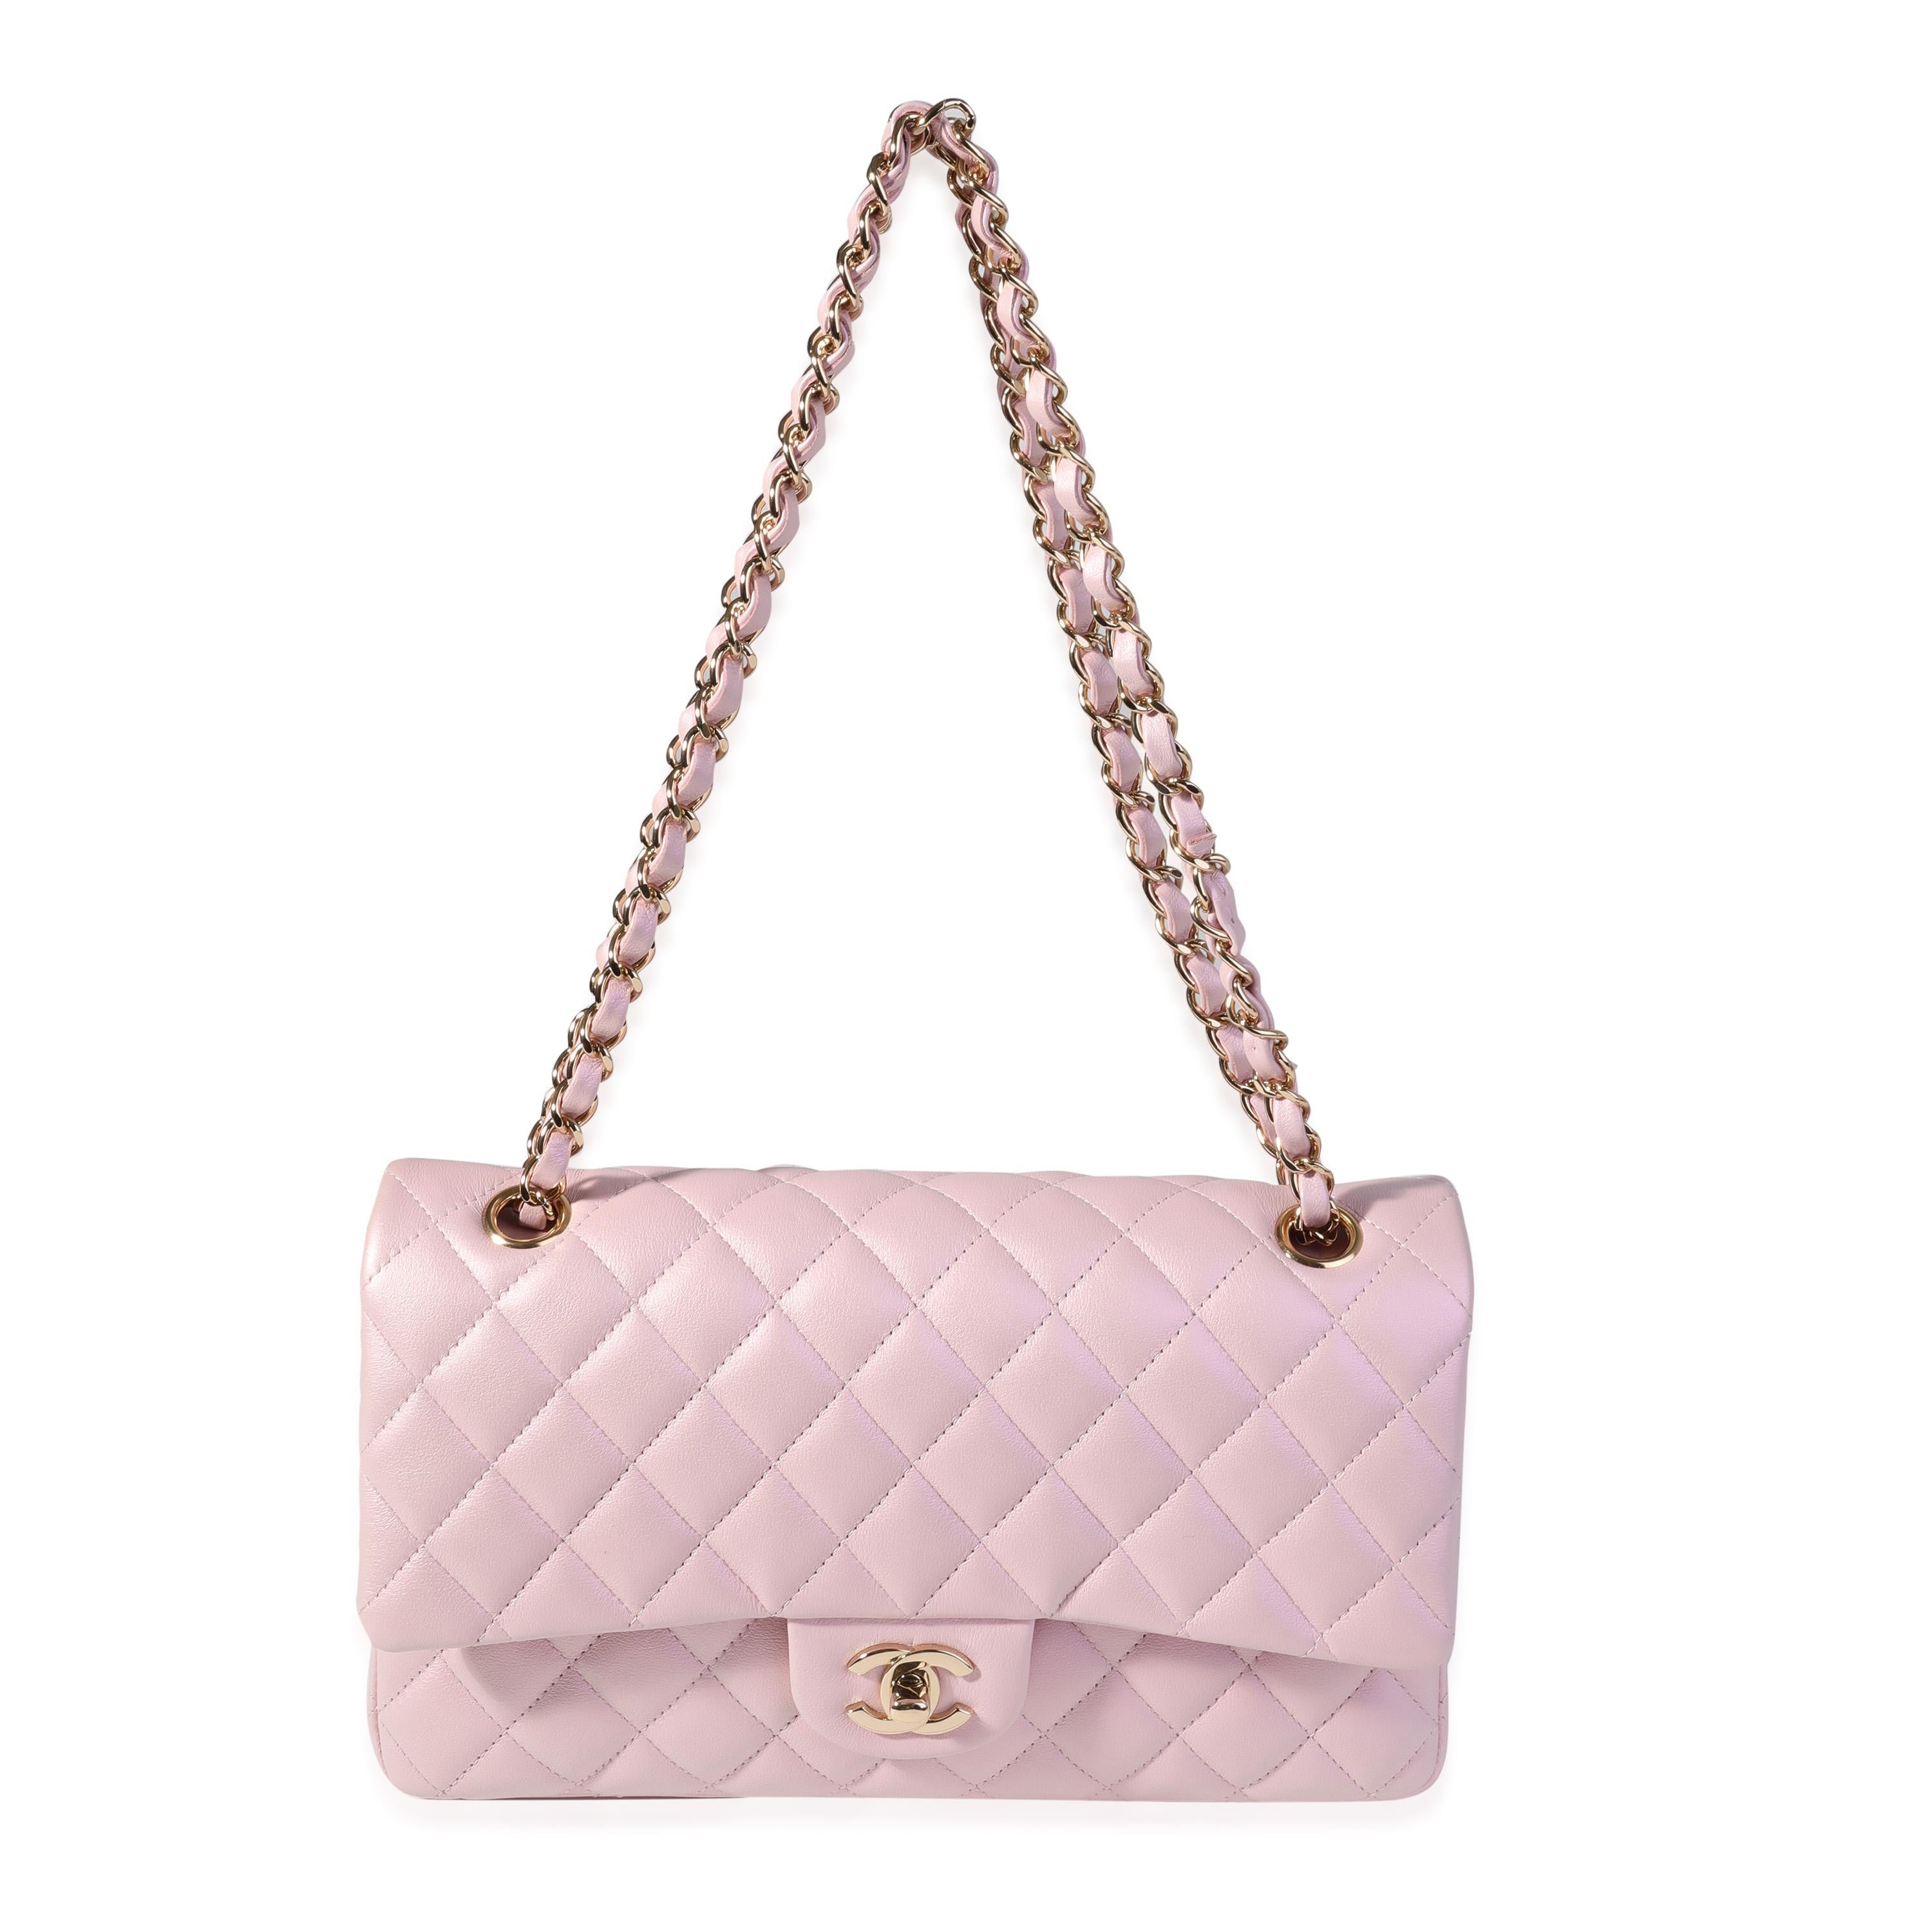 Listing Title: Chanel Iridescent Pink Quilted Calfskin Medium Classic Double Flap Bag
SKU: 119940
Condition: Pre-owned 
Handbag Condition: Excellent
Condition Comments: Excellent Condition. Plastic on some hardware. Hairline scratching to hardware.